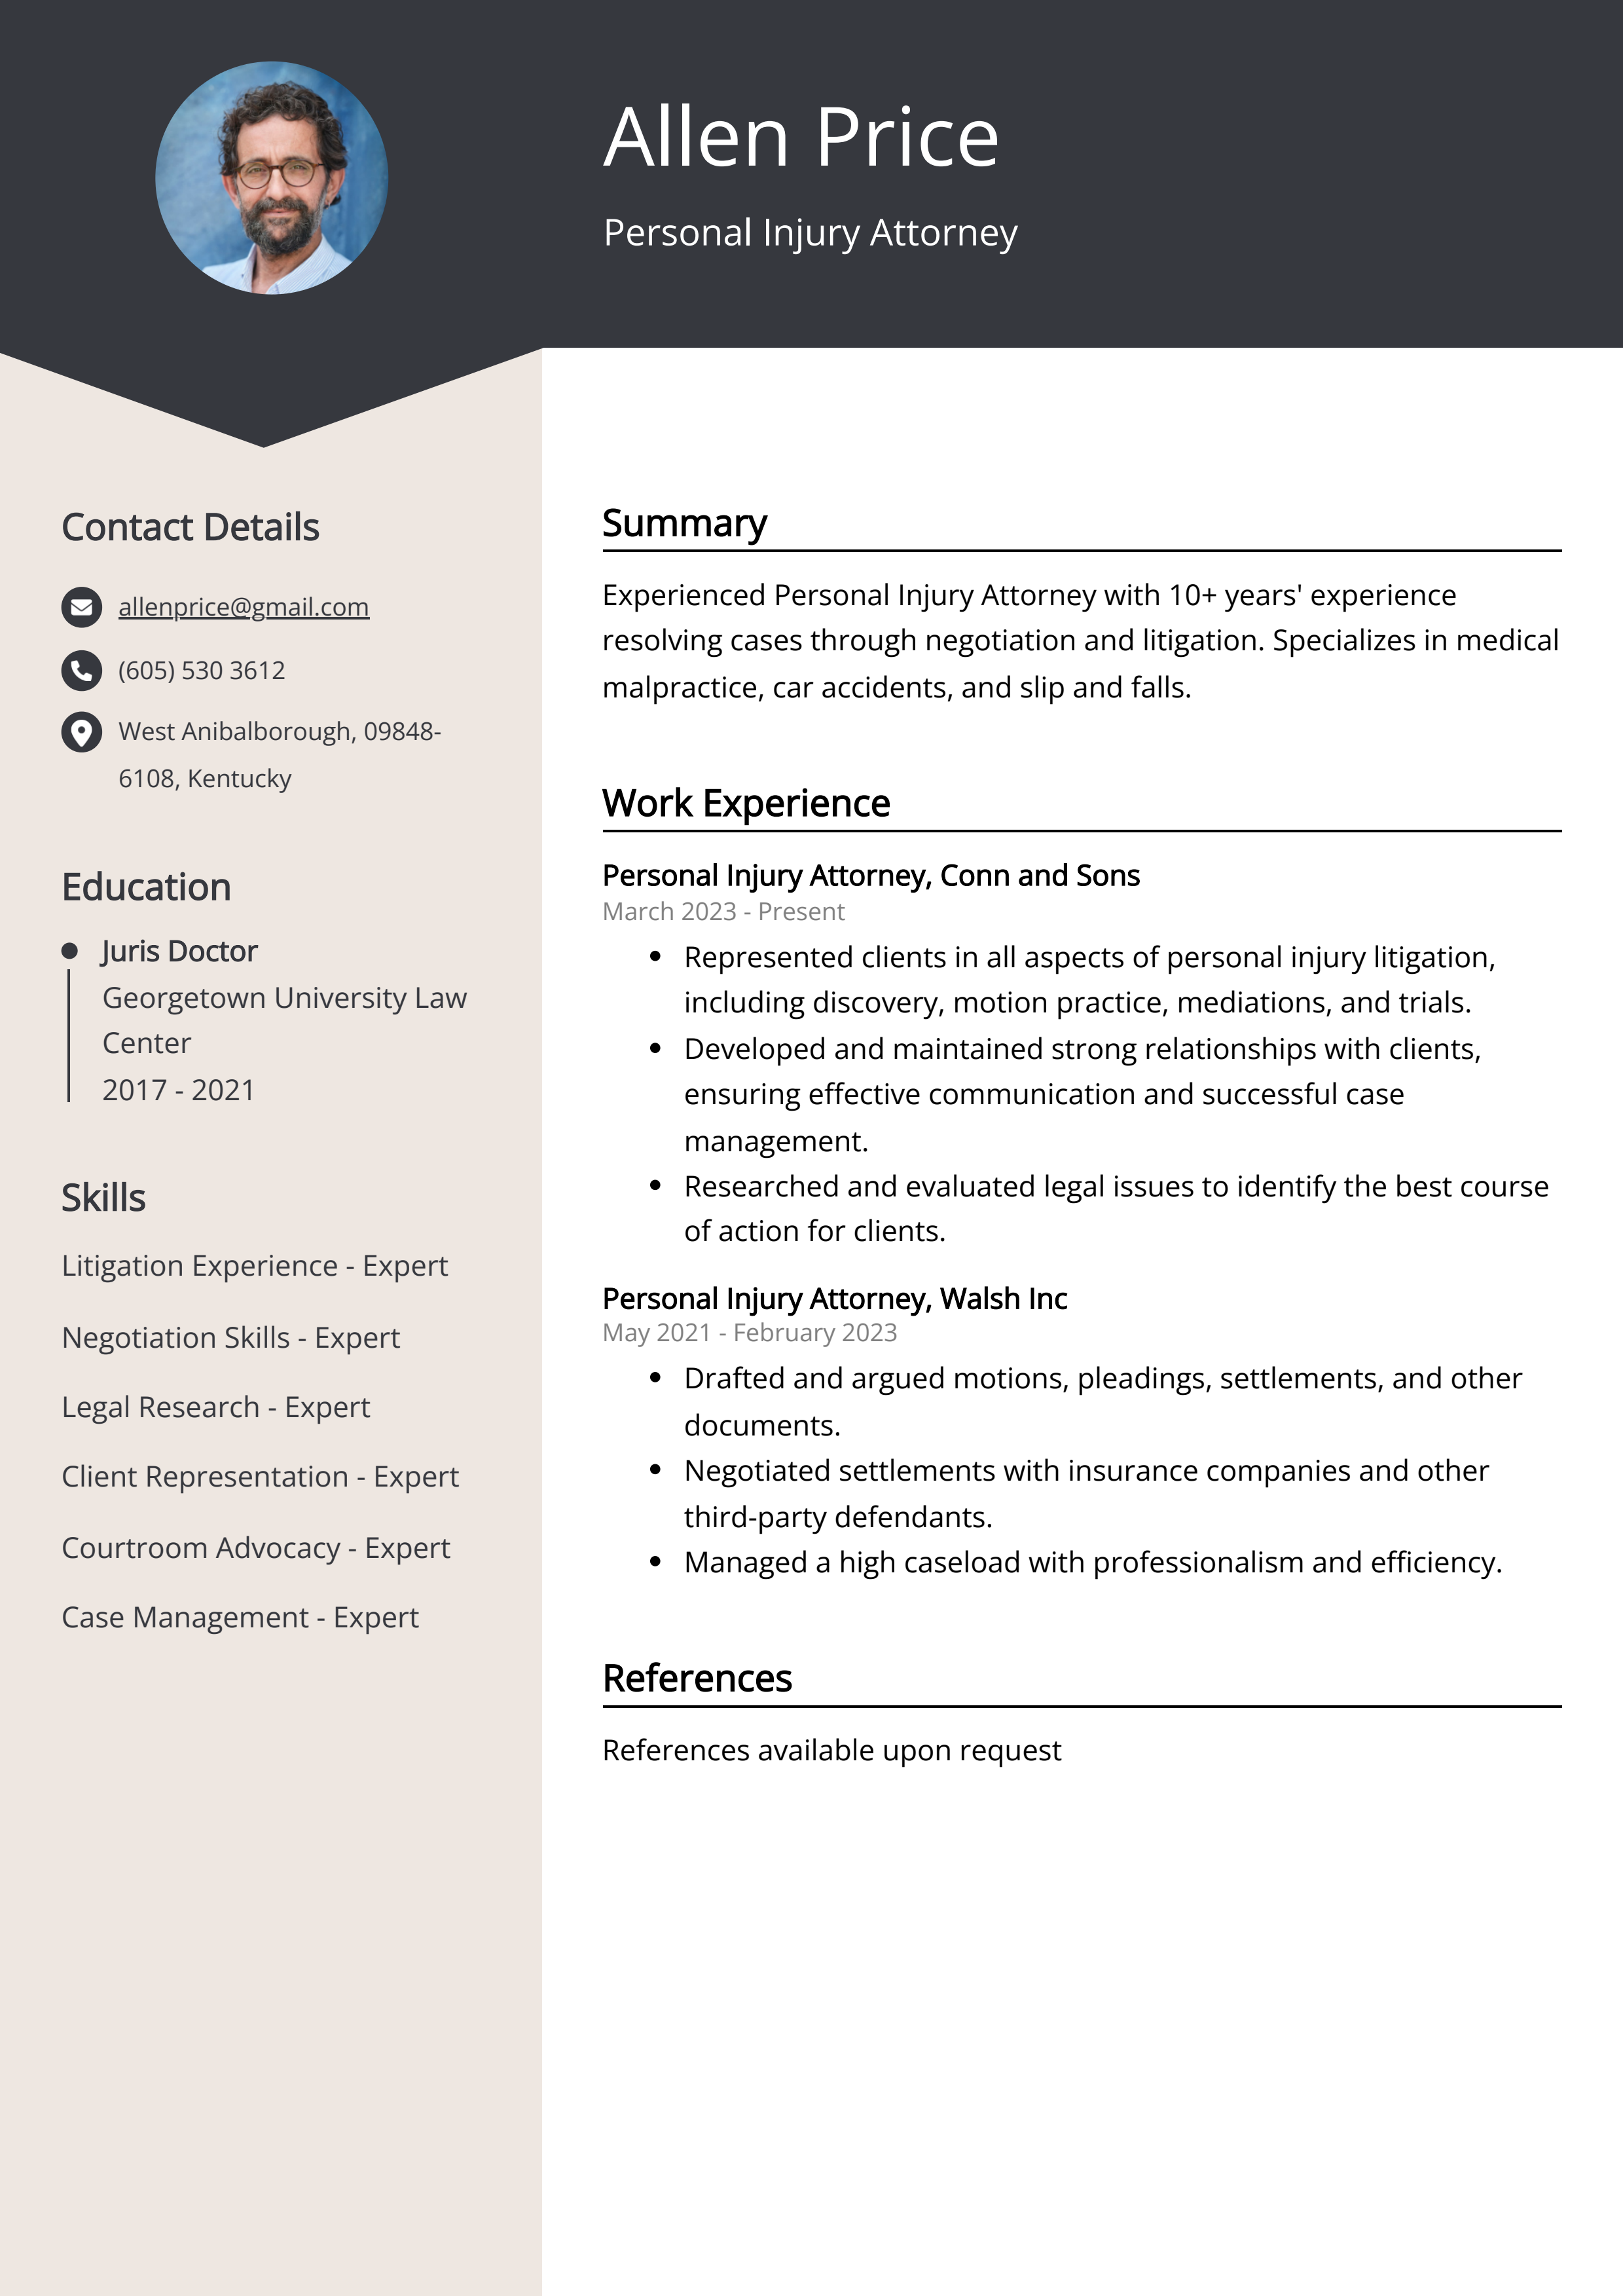 Personal Injury Attorney CV Example